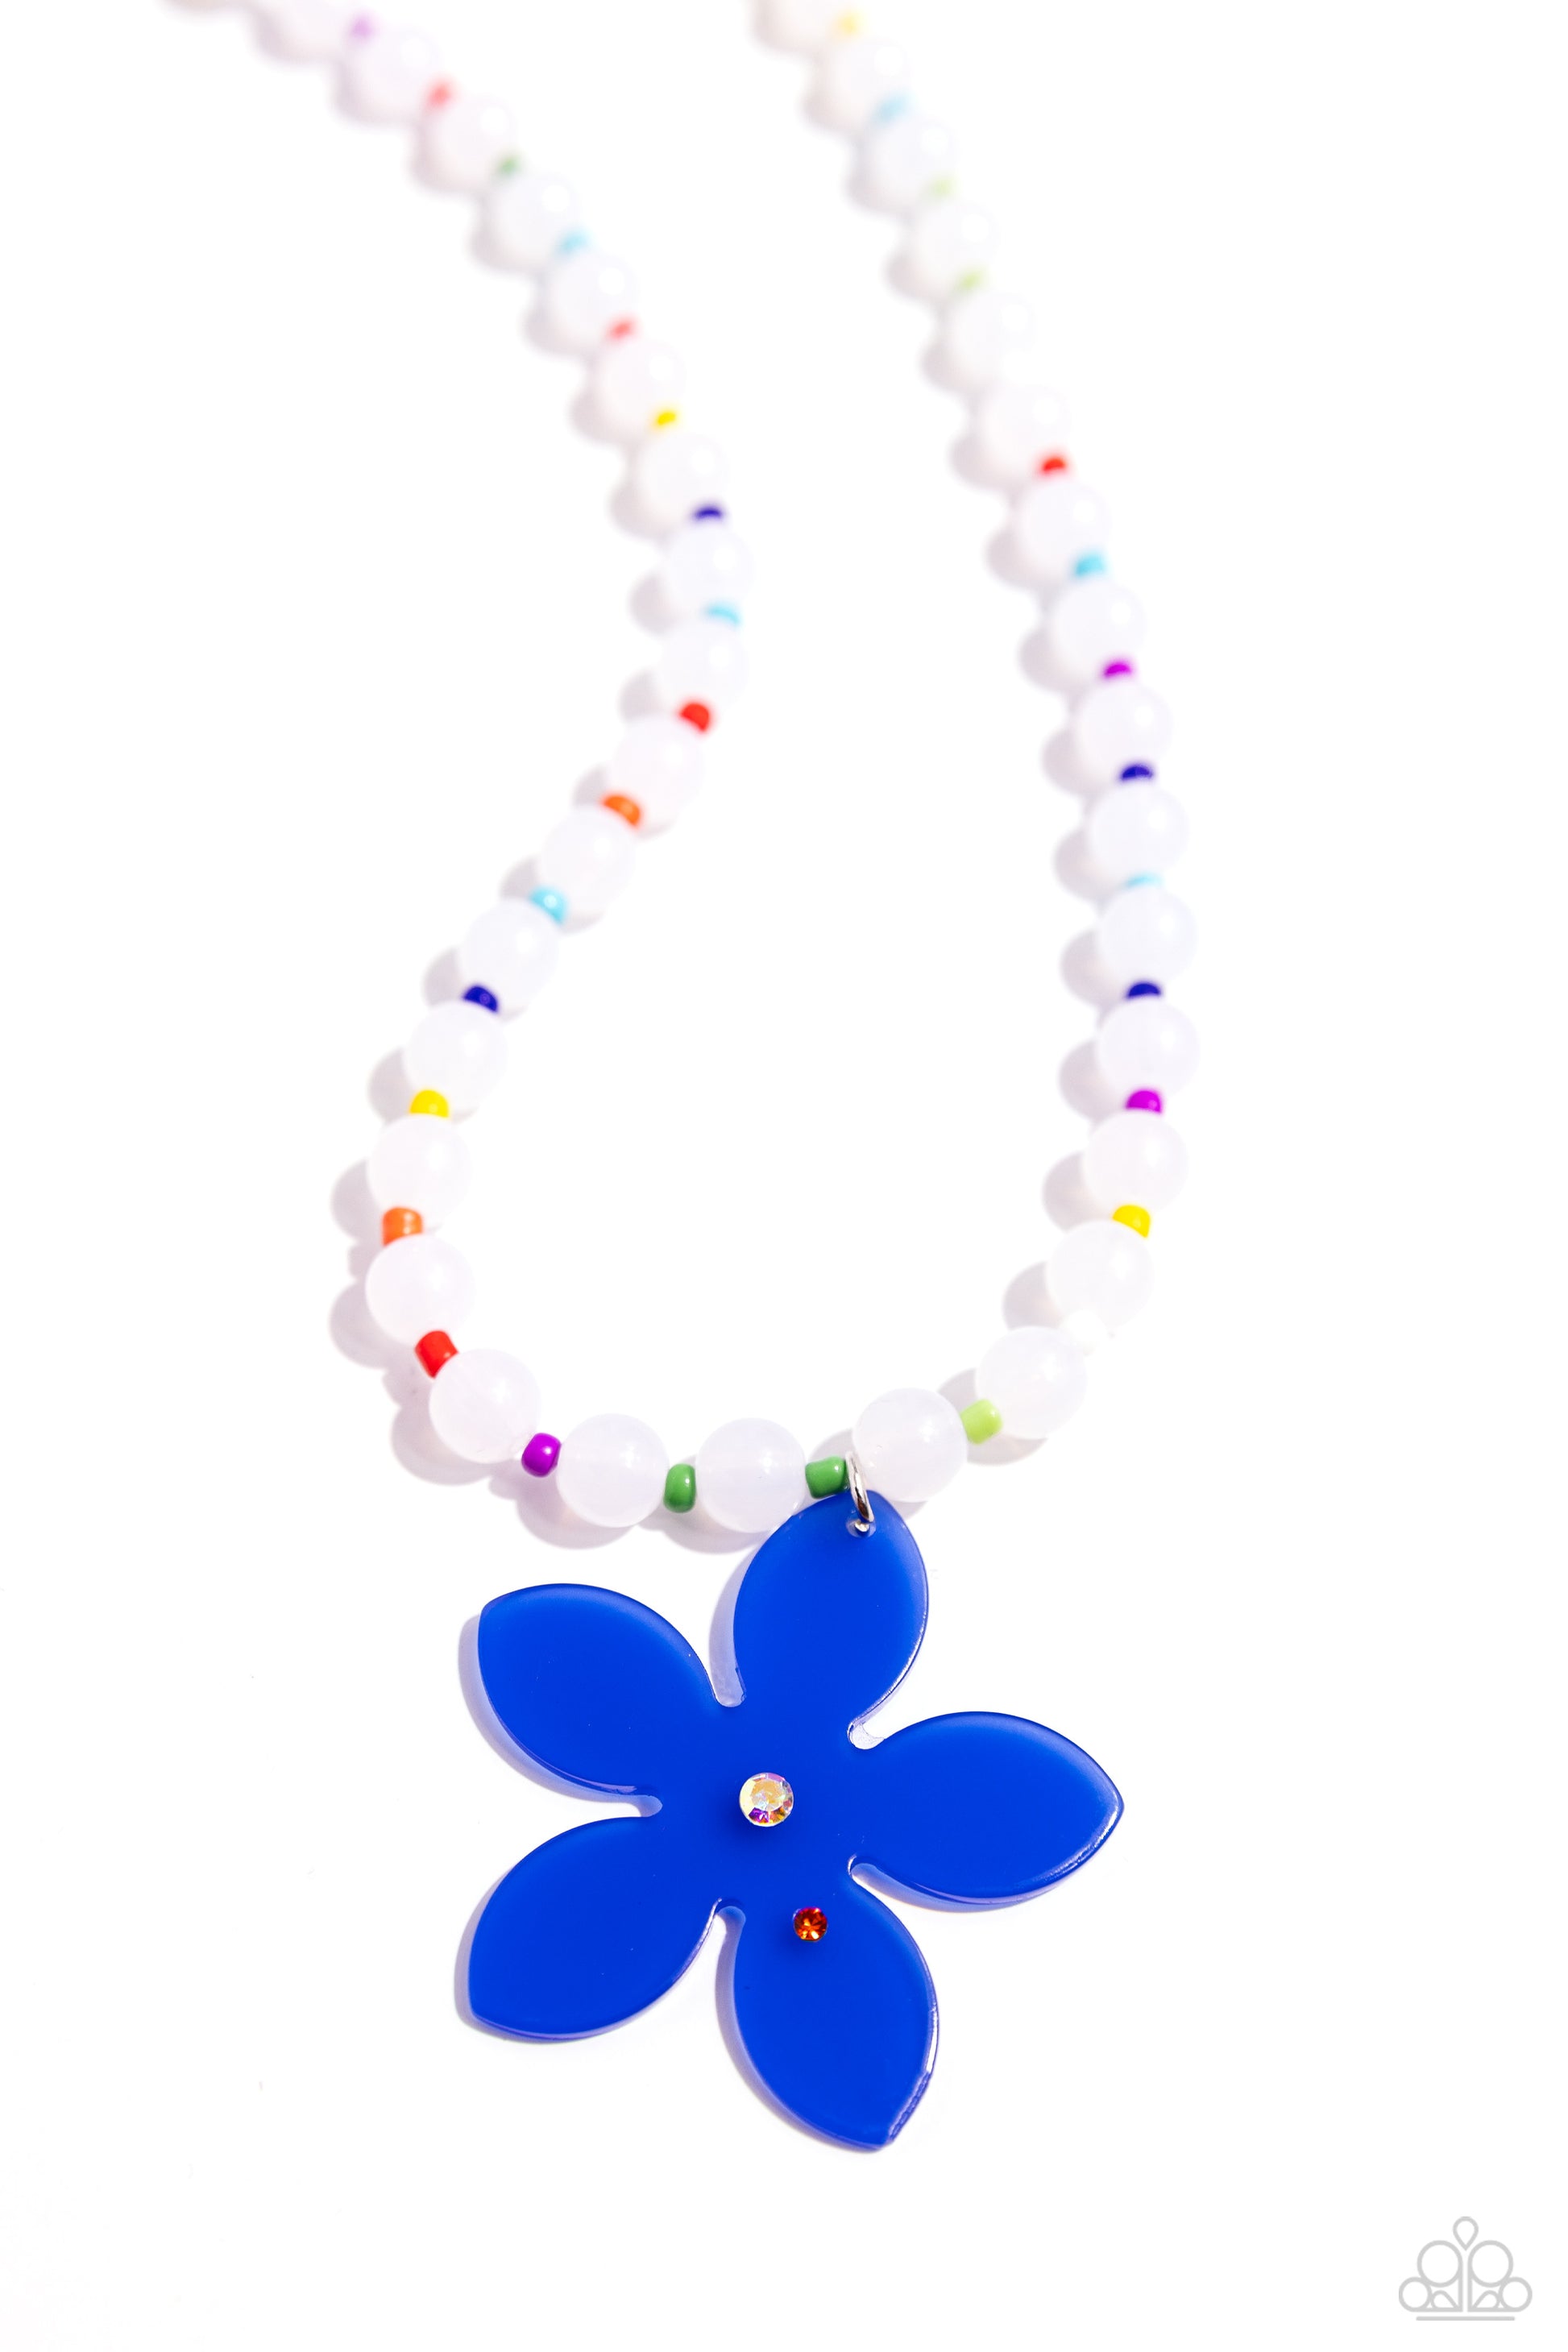 Paparazzi Accessories - Nostalgic Novelty - Blue Necklaces infused along an invisible string around the neckline, a collection of milky white beads alternates with yellow, Kohlrabi, Royal Blue, purple, orange, white, coral, and light blue seed beads. Featuring an iridescent rhinestone center and an orange rhinestone accent, a Royal Blue acrylic flower dangles from the center of the display for a nostalgic finish. Features an adjustable clasp closure. Due to its prismatic palette, color may vary.